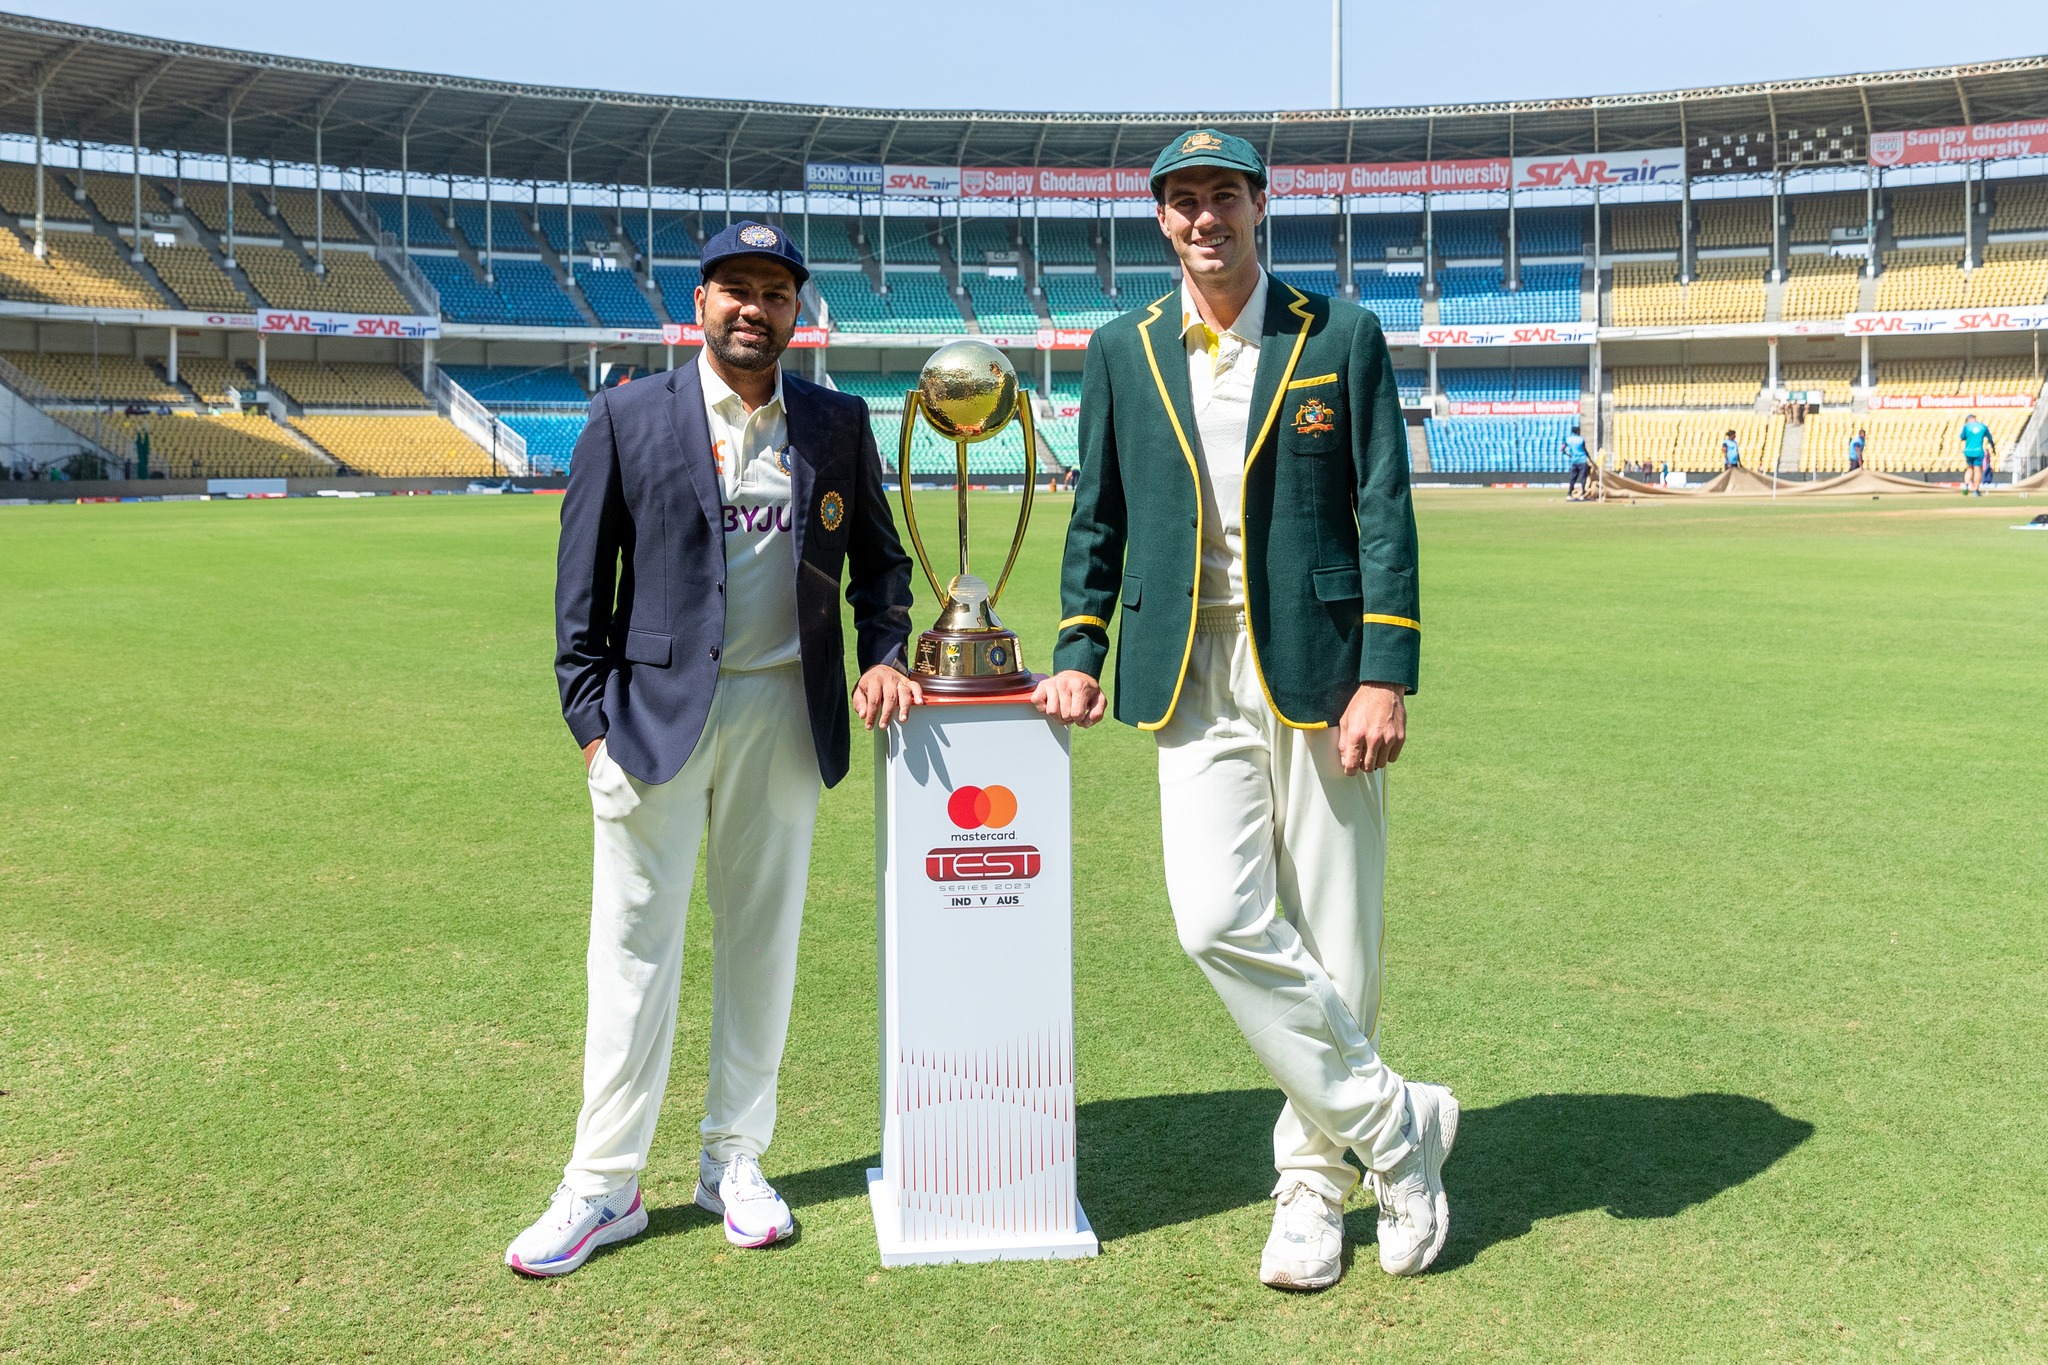 IND vs AUS Live Telecast Channel In India And Live Streaming App In India- Where To Watch WTC Final Live? ICC World Test Championship Final 2023